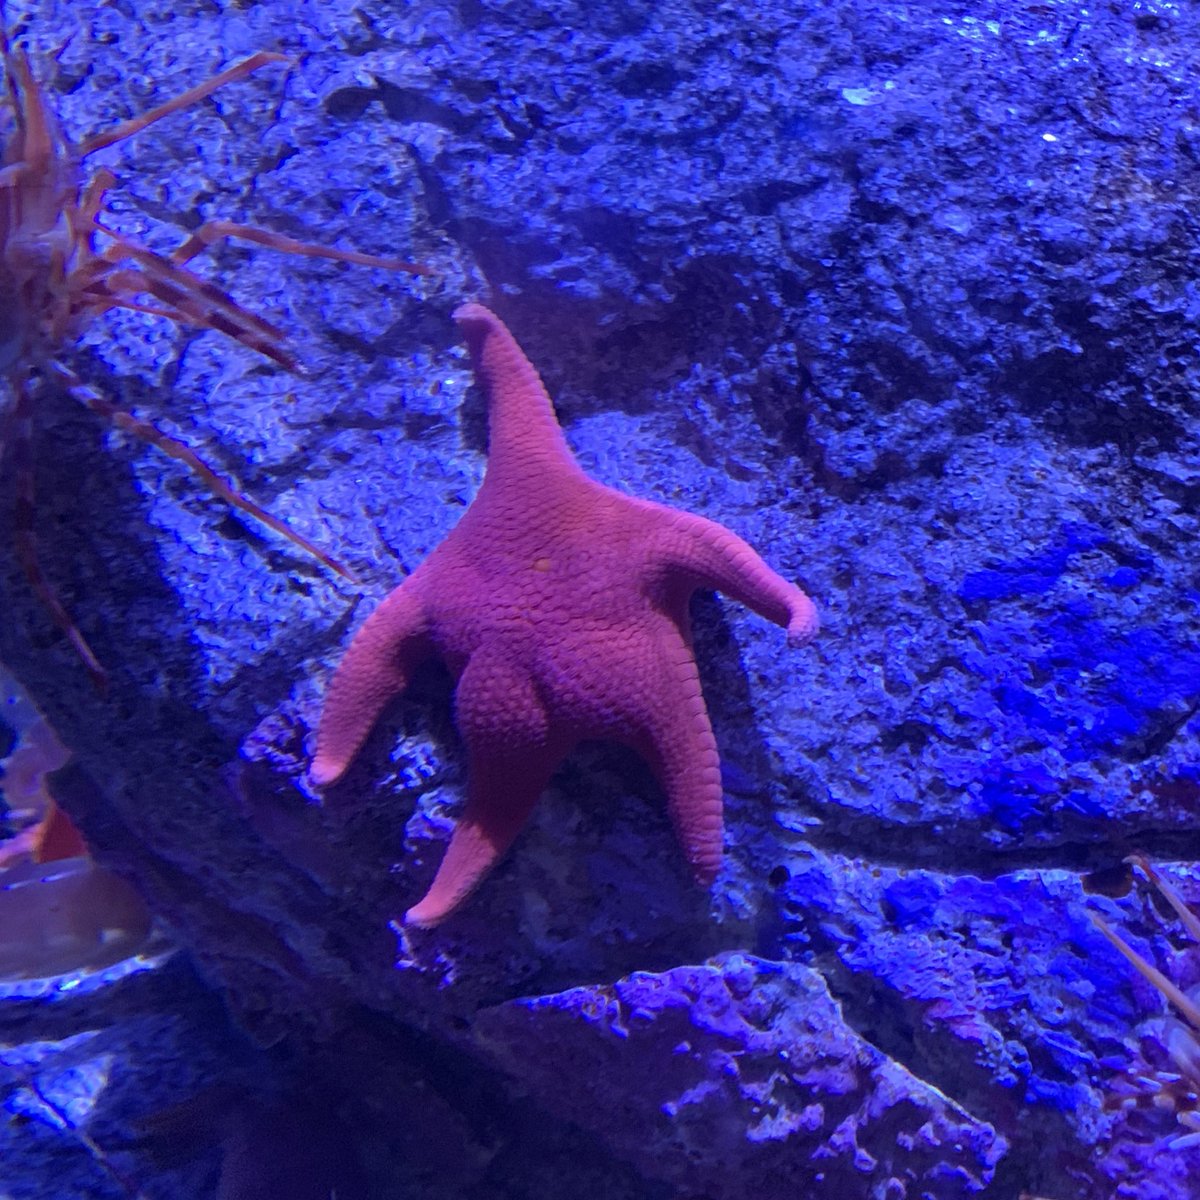 Saw a thicc ass starfish at the aquarium today 😌